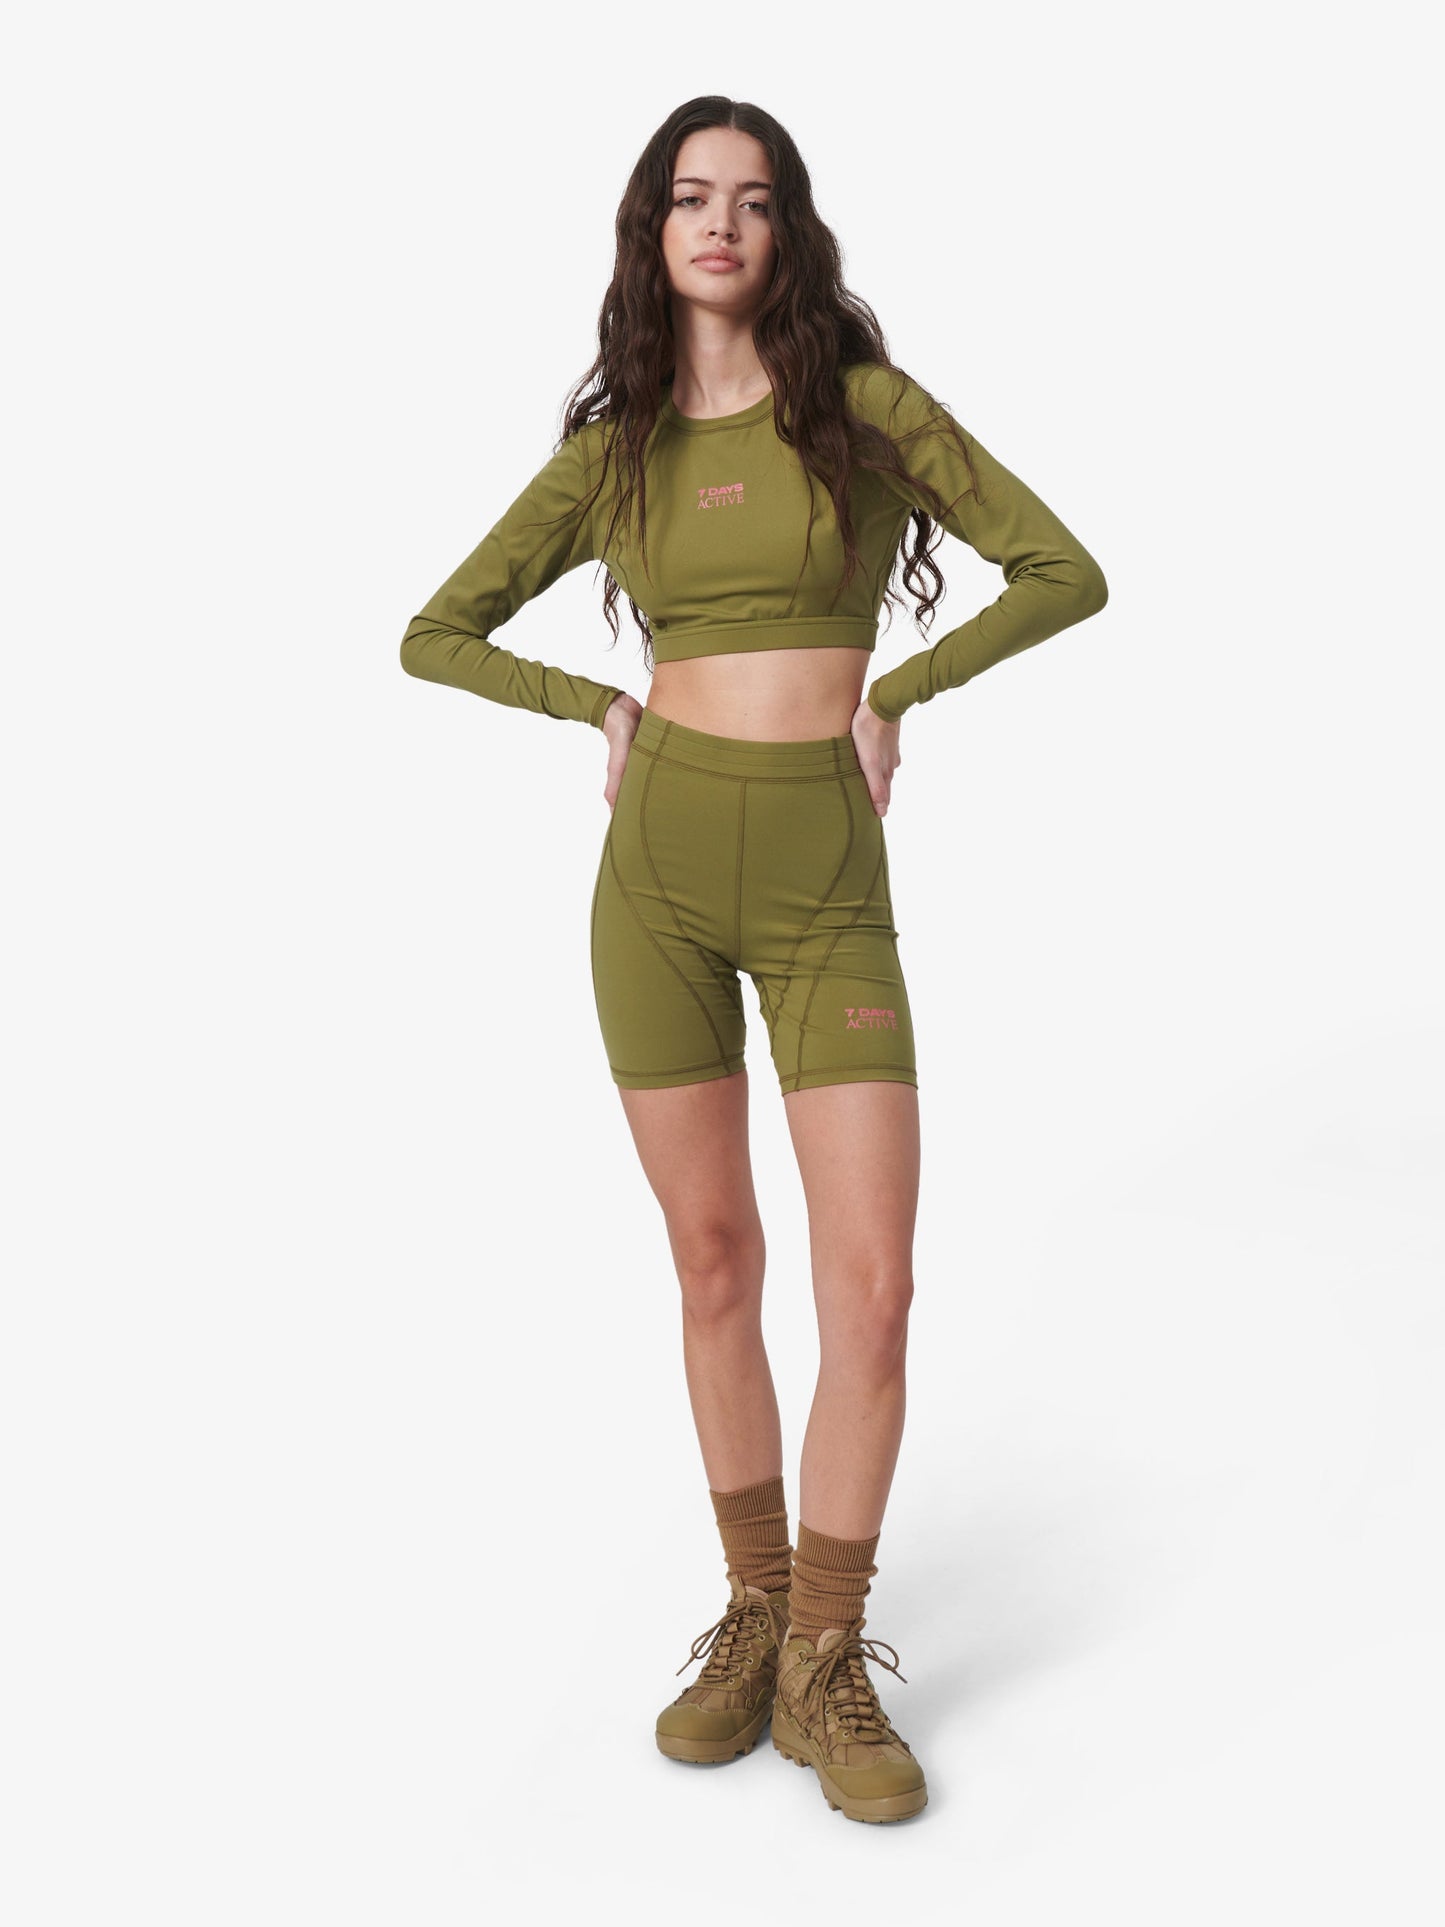 7 DAYS Cropped Longs Sleeve Top T-shirt L/S 247 Capulet Olive